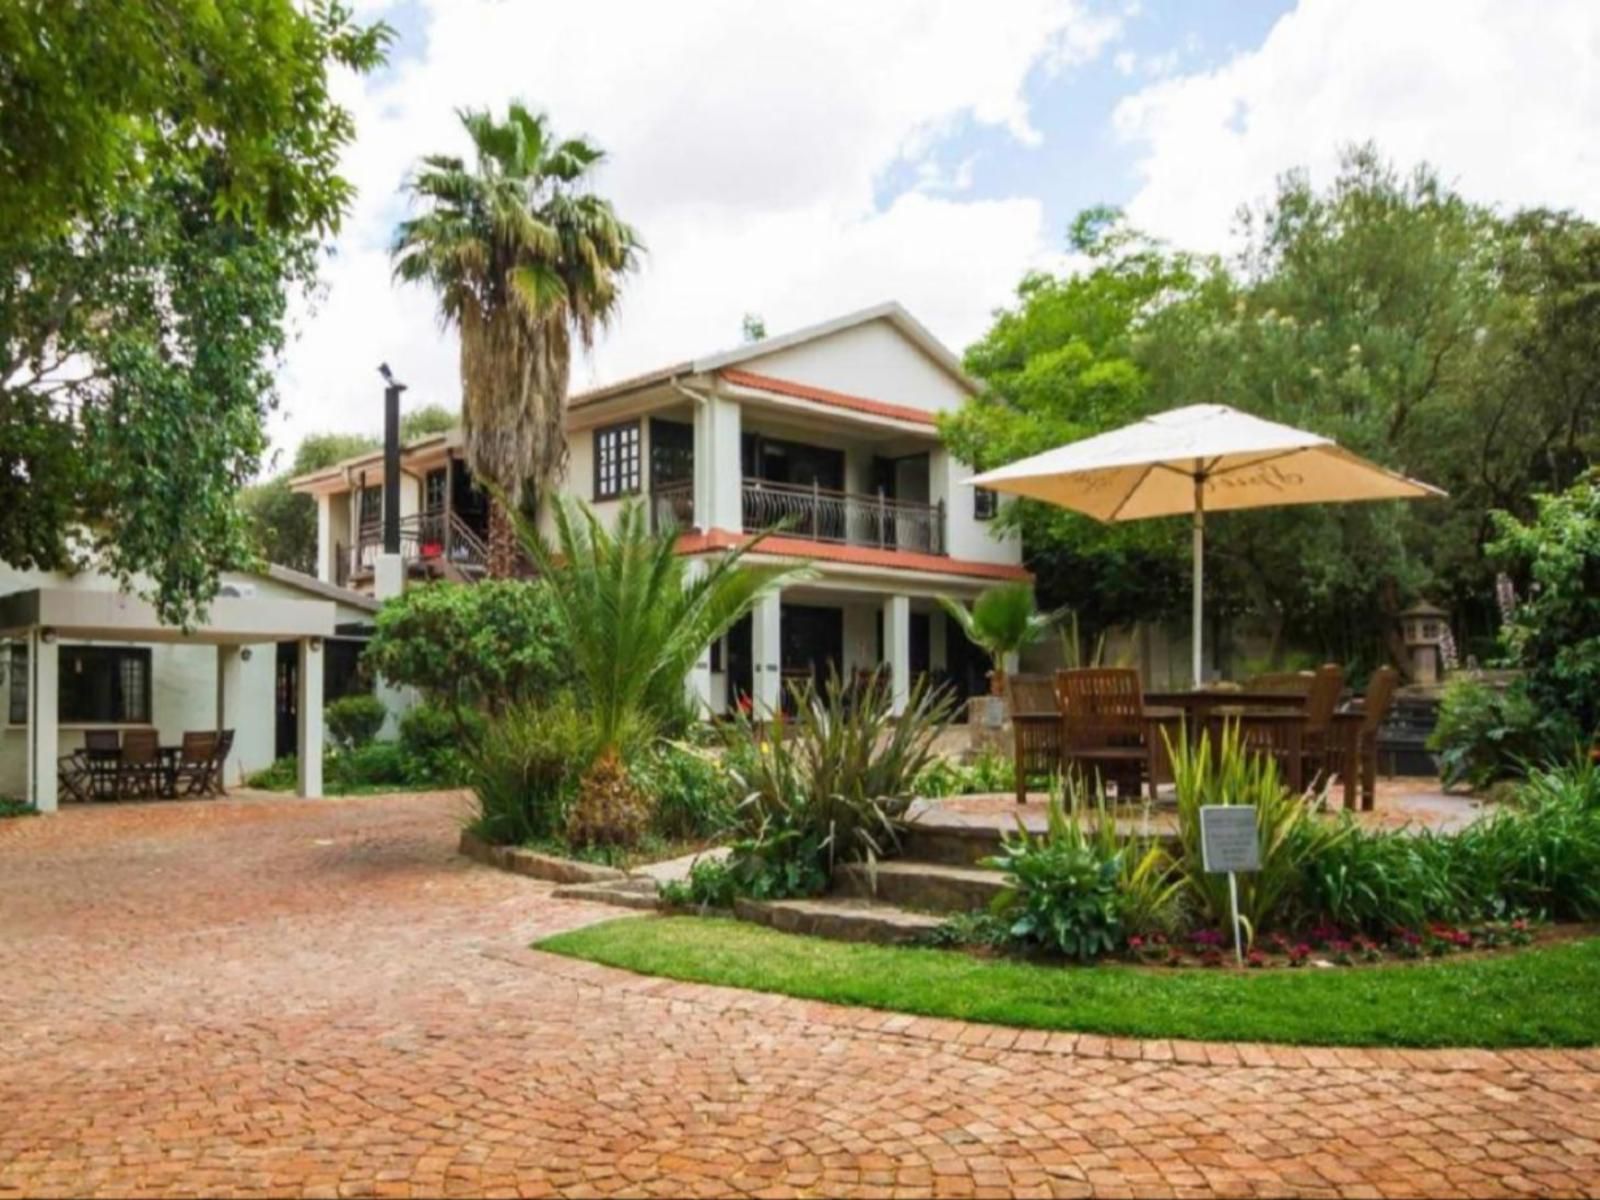 The Villa Guest House Bayswater Bloemfontein Free State South Africa House, Building, Architecture, Palm Tree, Plant, Nature, Wood, Garden